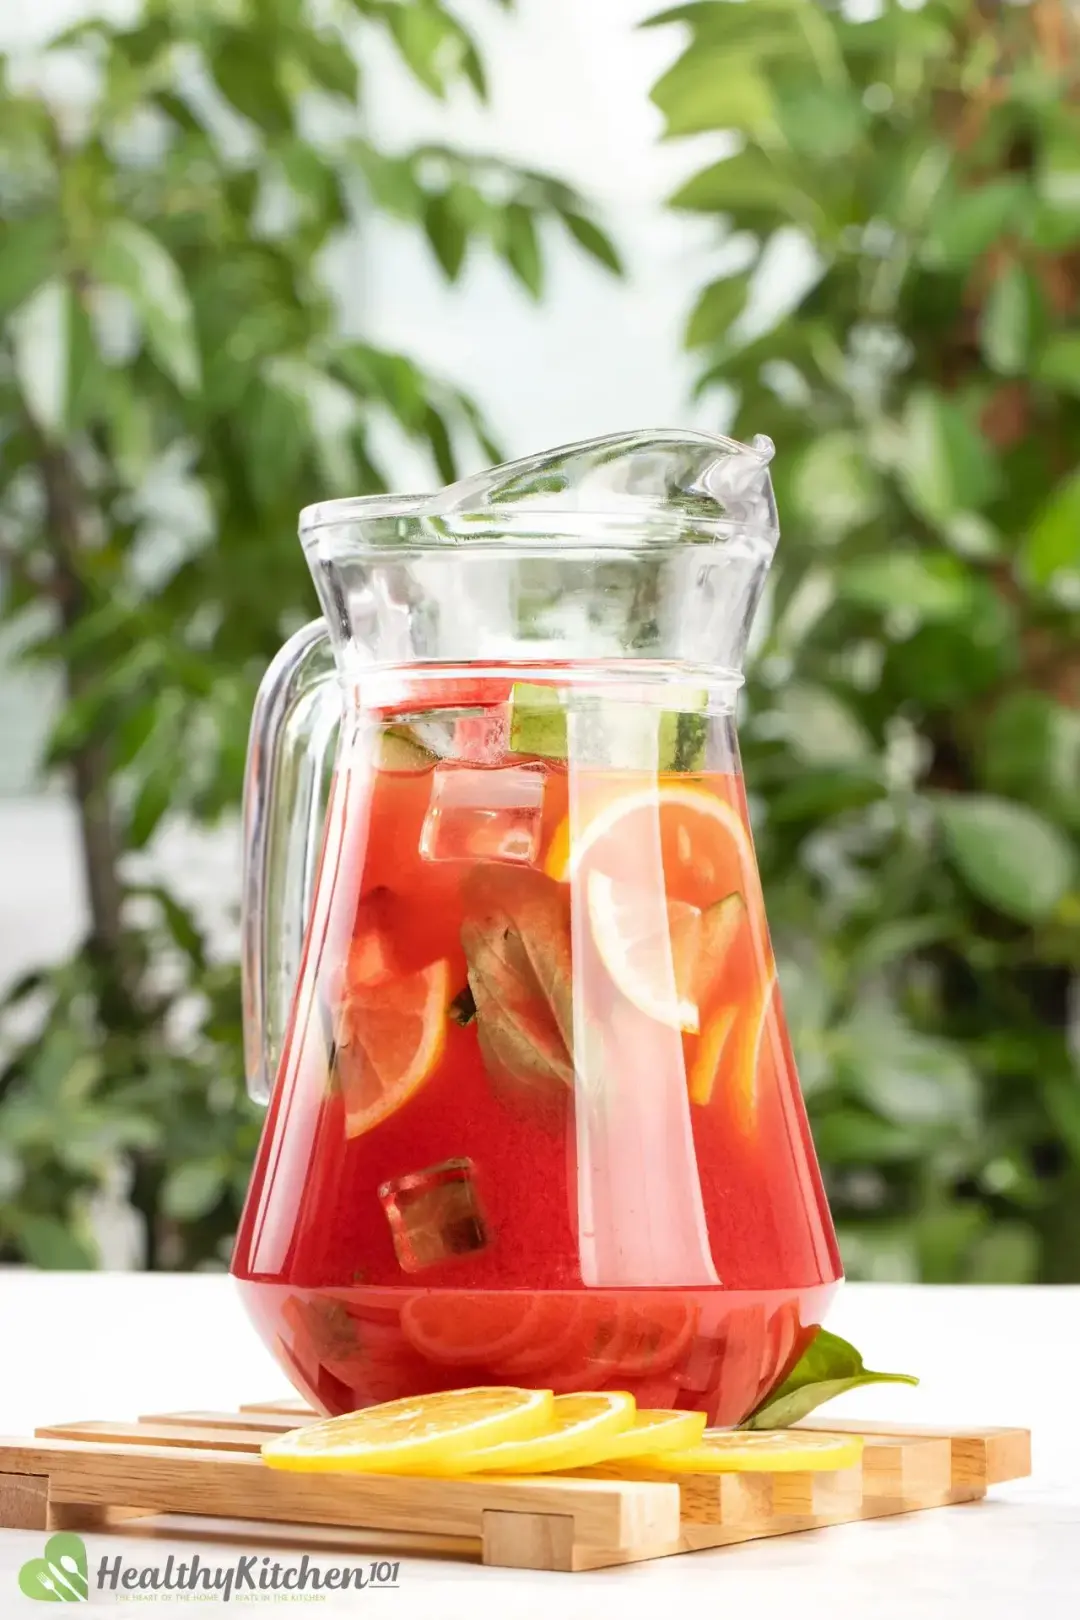 A jug of watermelon jungle juice placed on a wooden board with some lemon slices and basil leaves on the sides